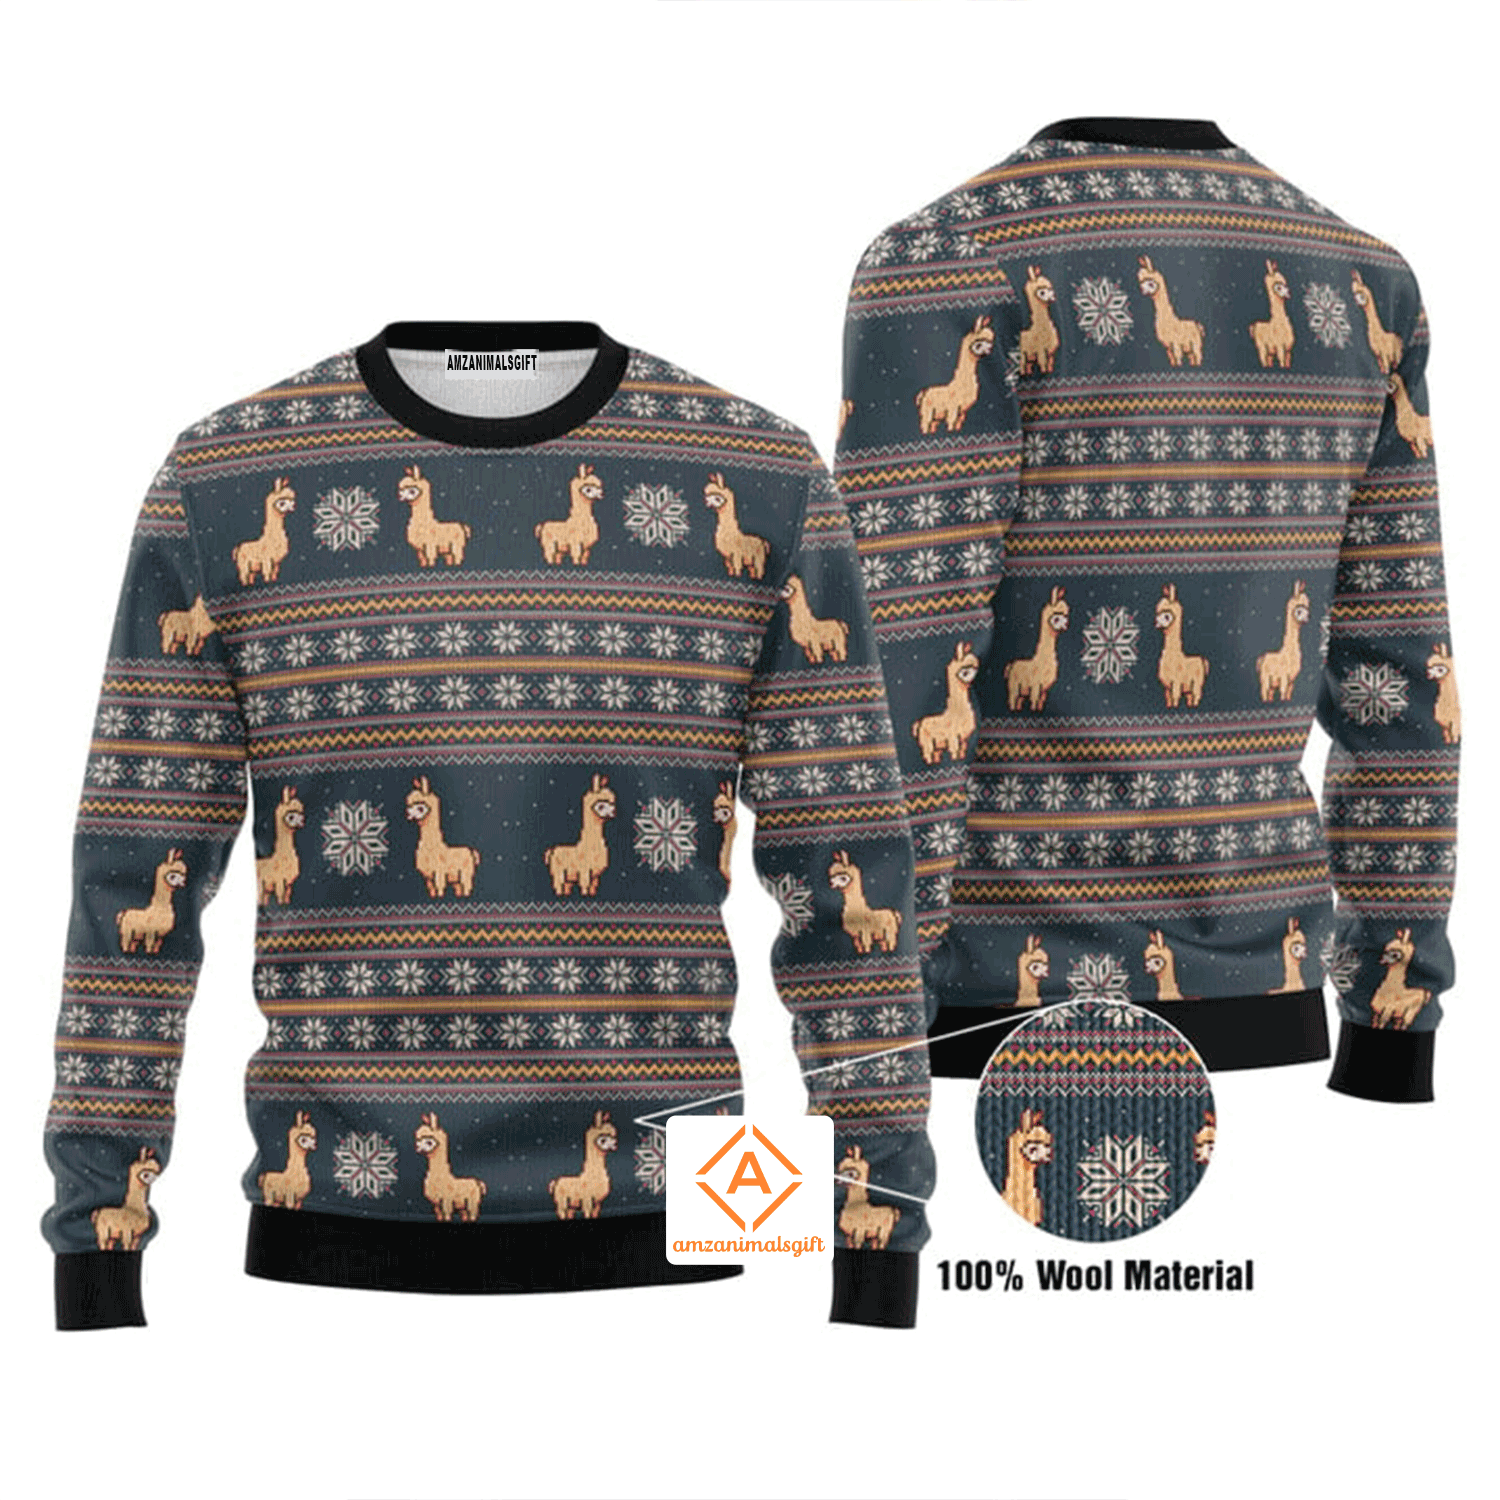 Amazing Llama Christmas Sweater, Ugly Sweater For Men & Women, Perfect Outfit For Christmas New Year Autumn Winter